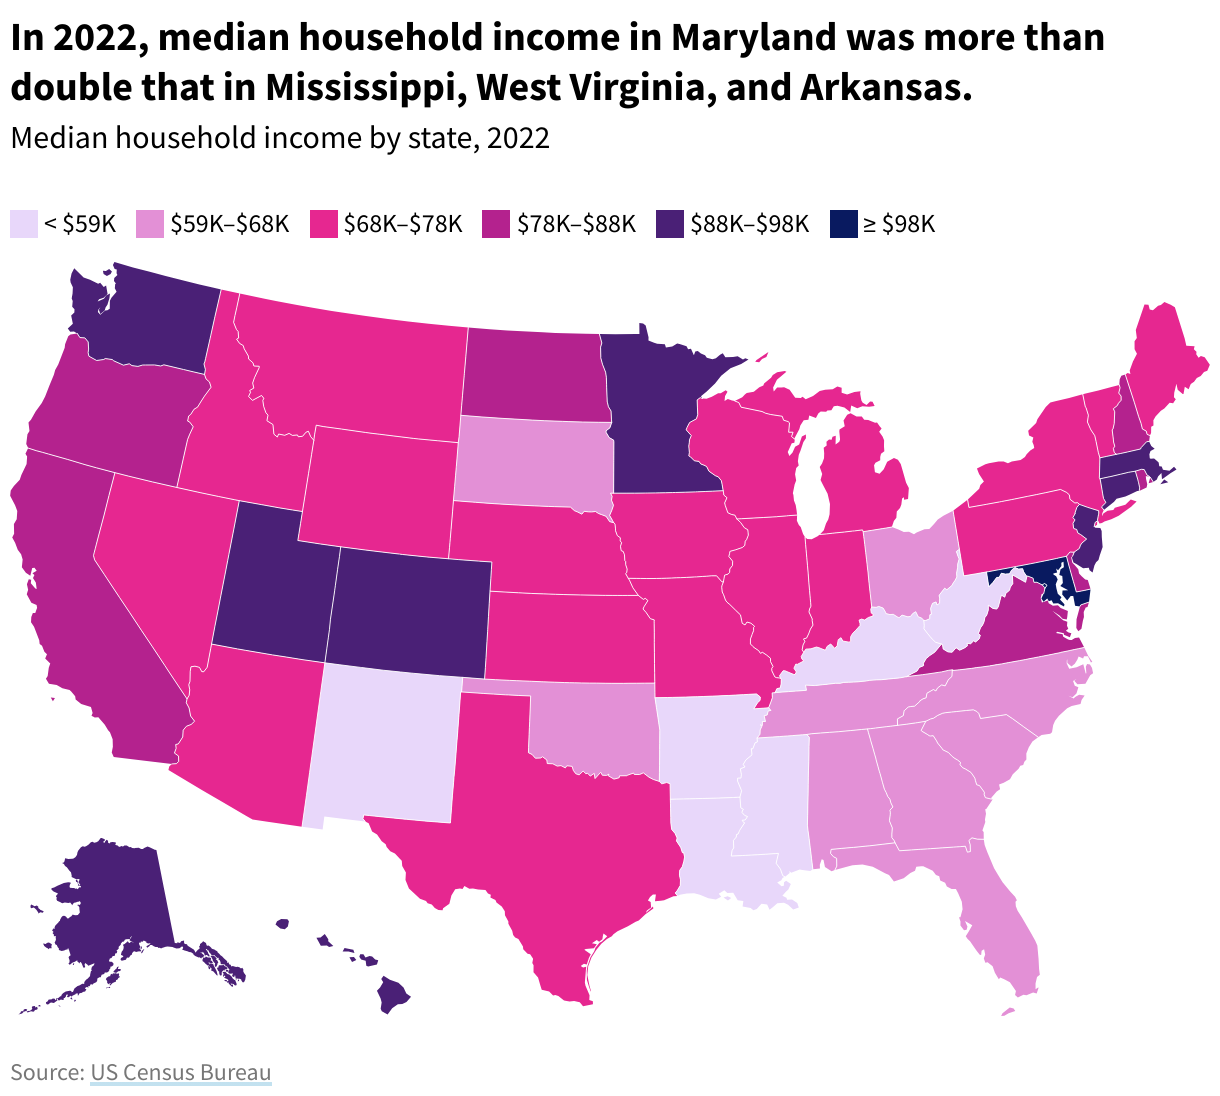 Choropleth map of inflation-adjusted median annual household income by state including Washington, DC in 2021. Top 5 